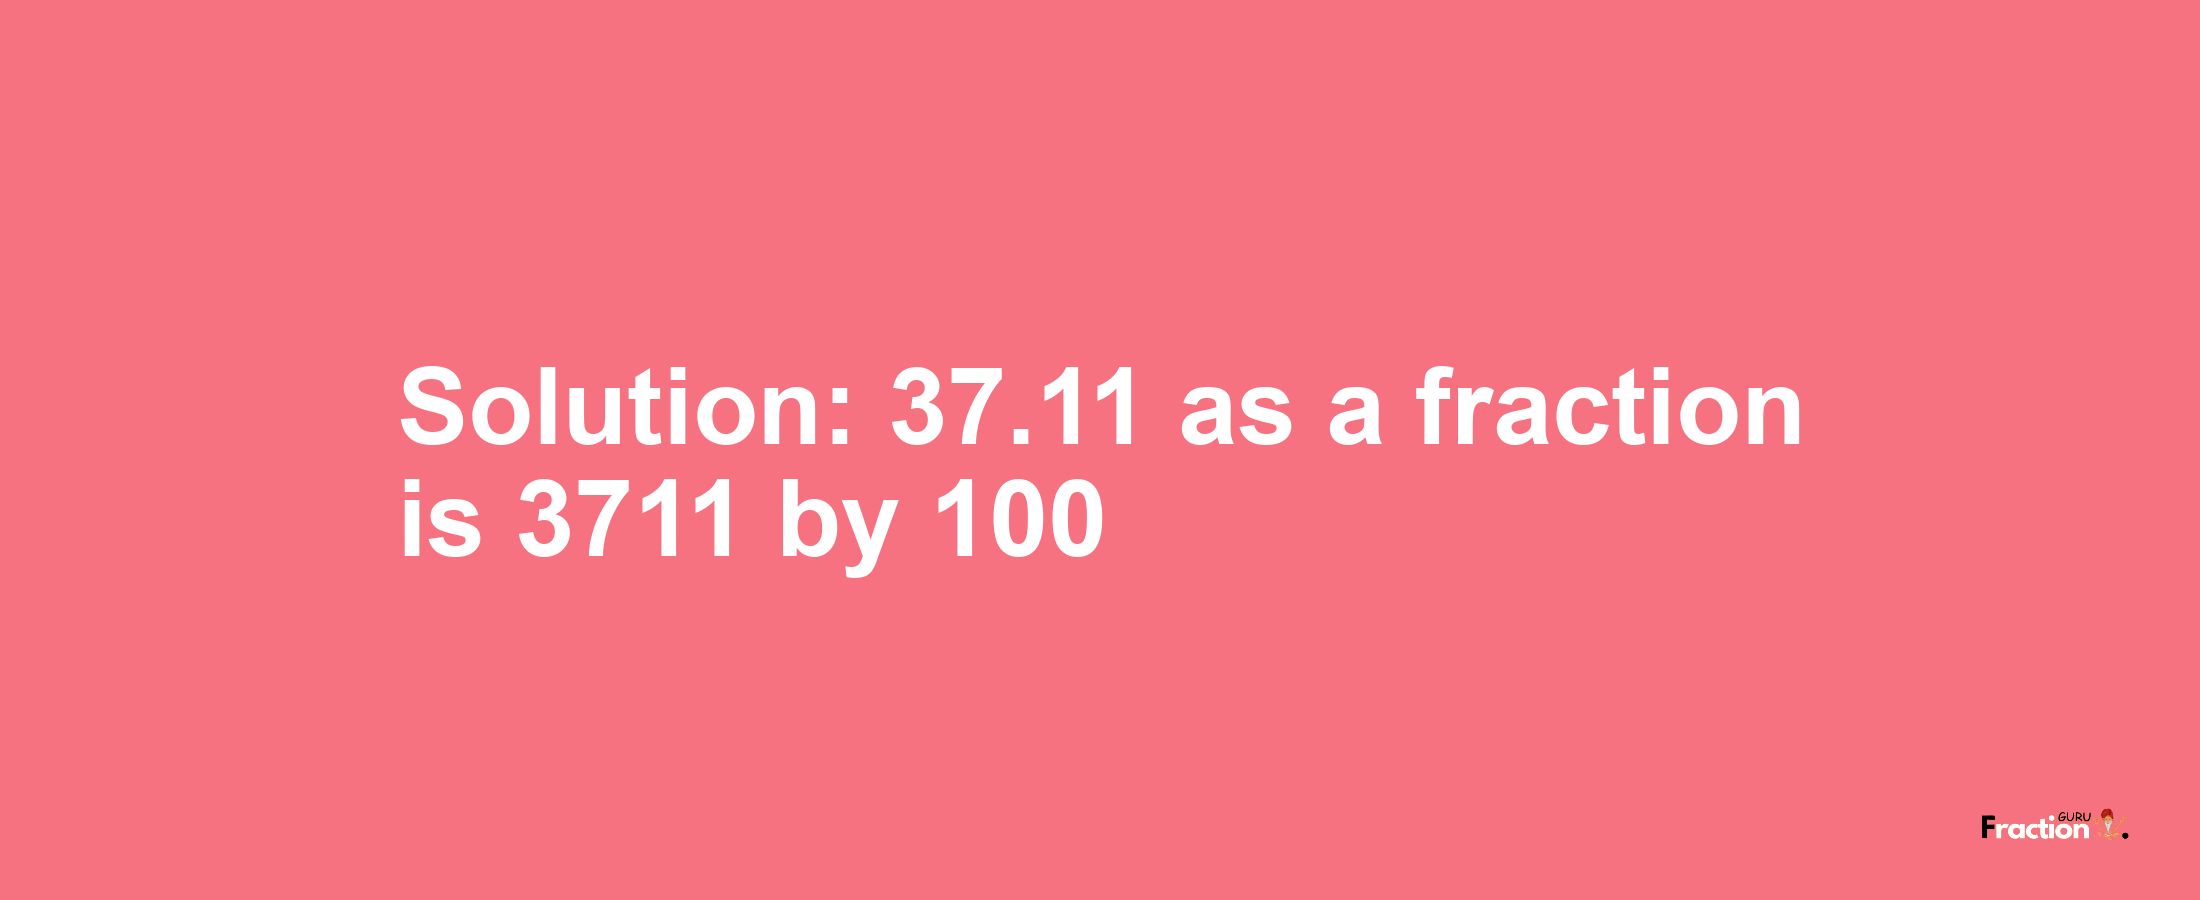 Solution:37.11 as a fraction is 3711/100